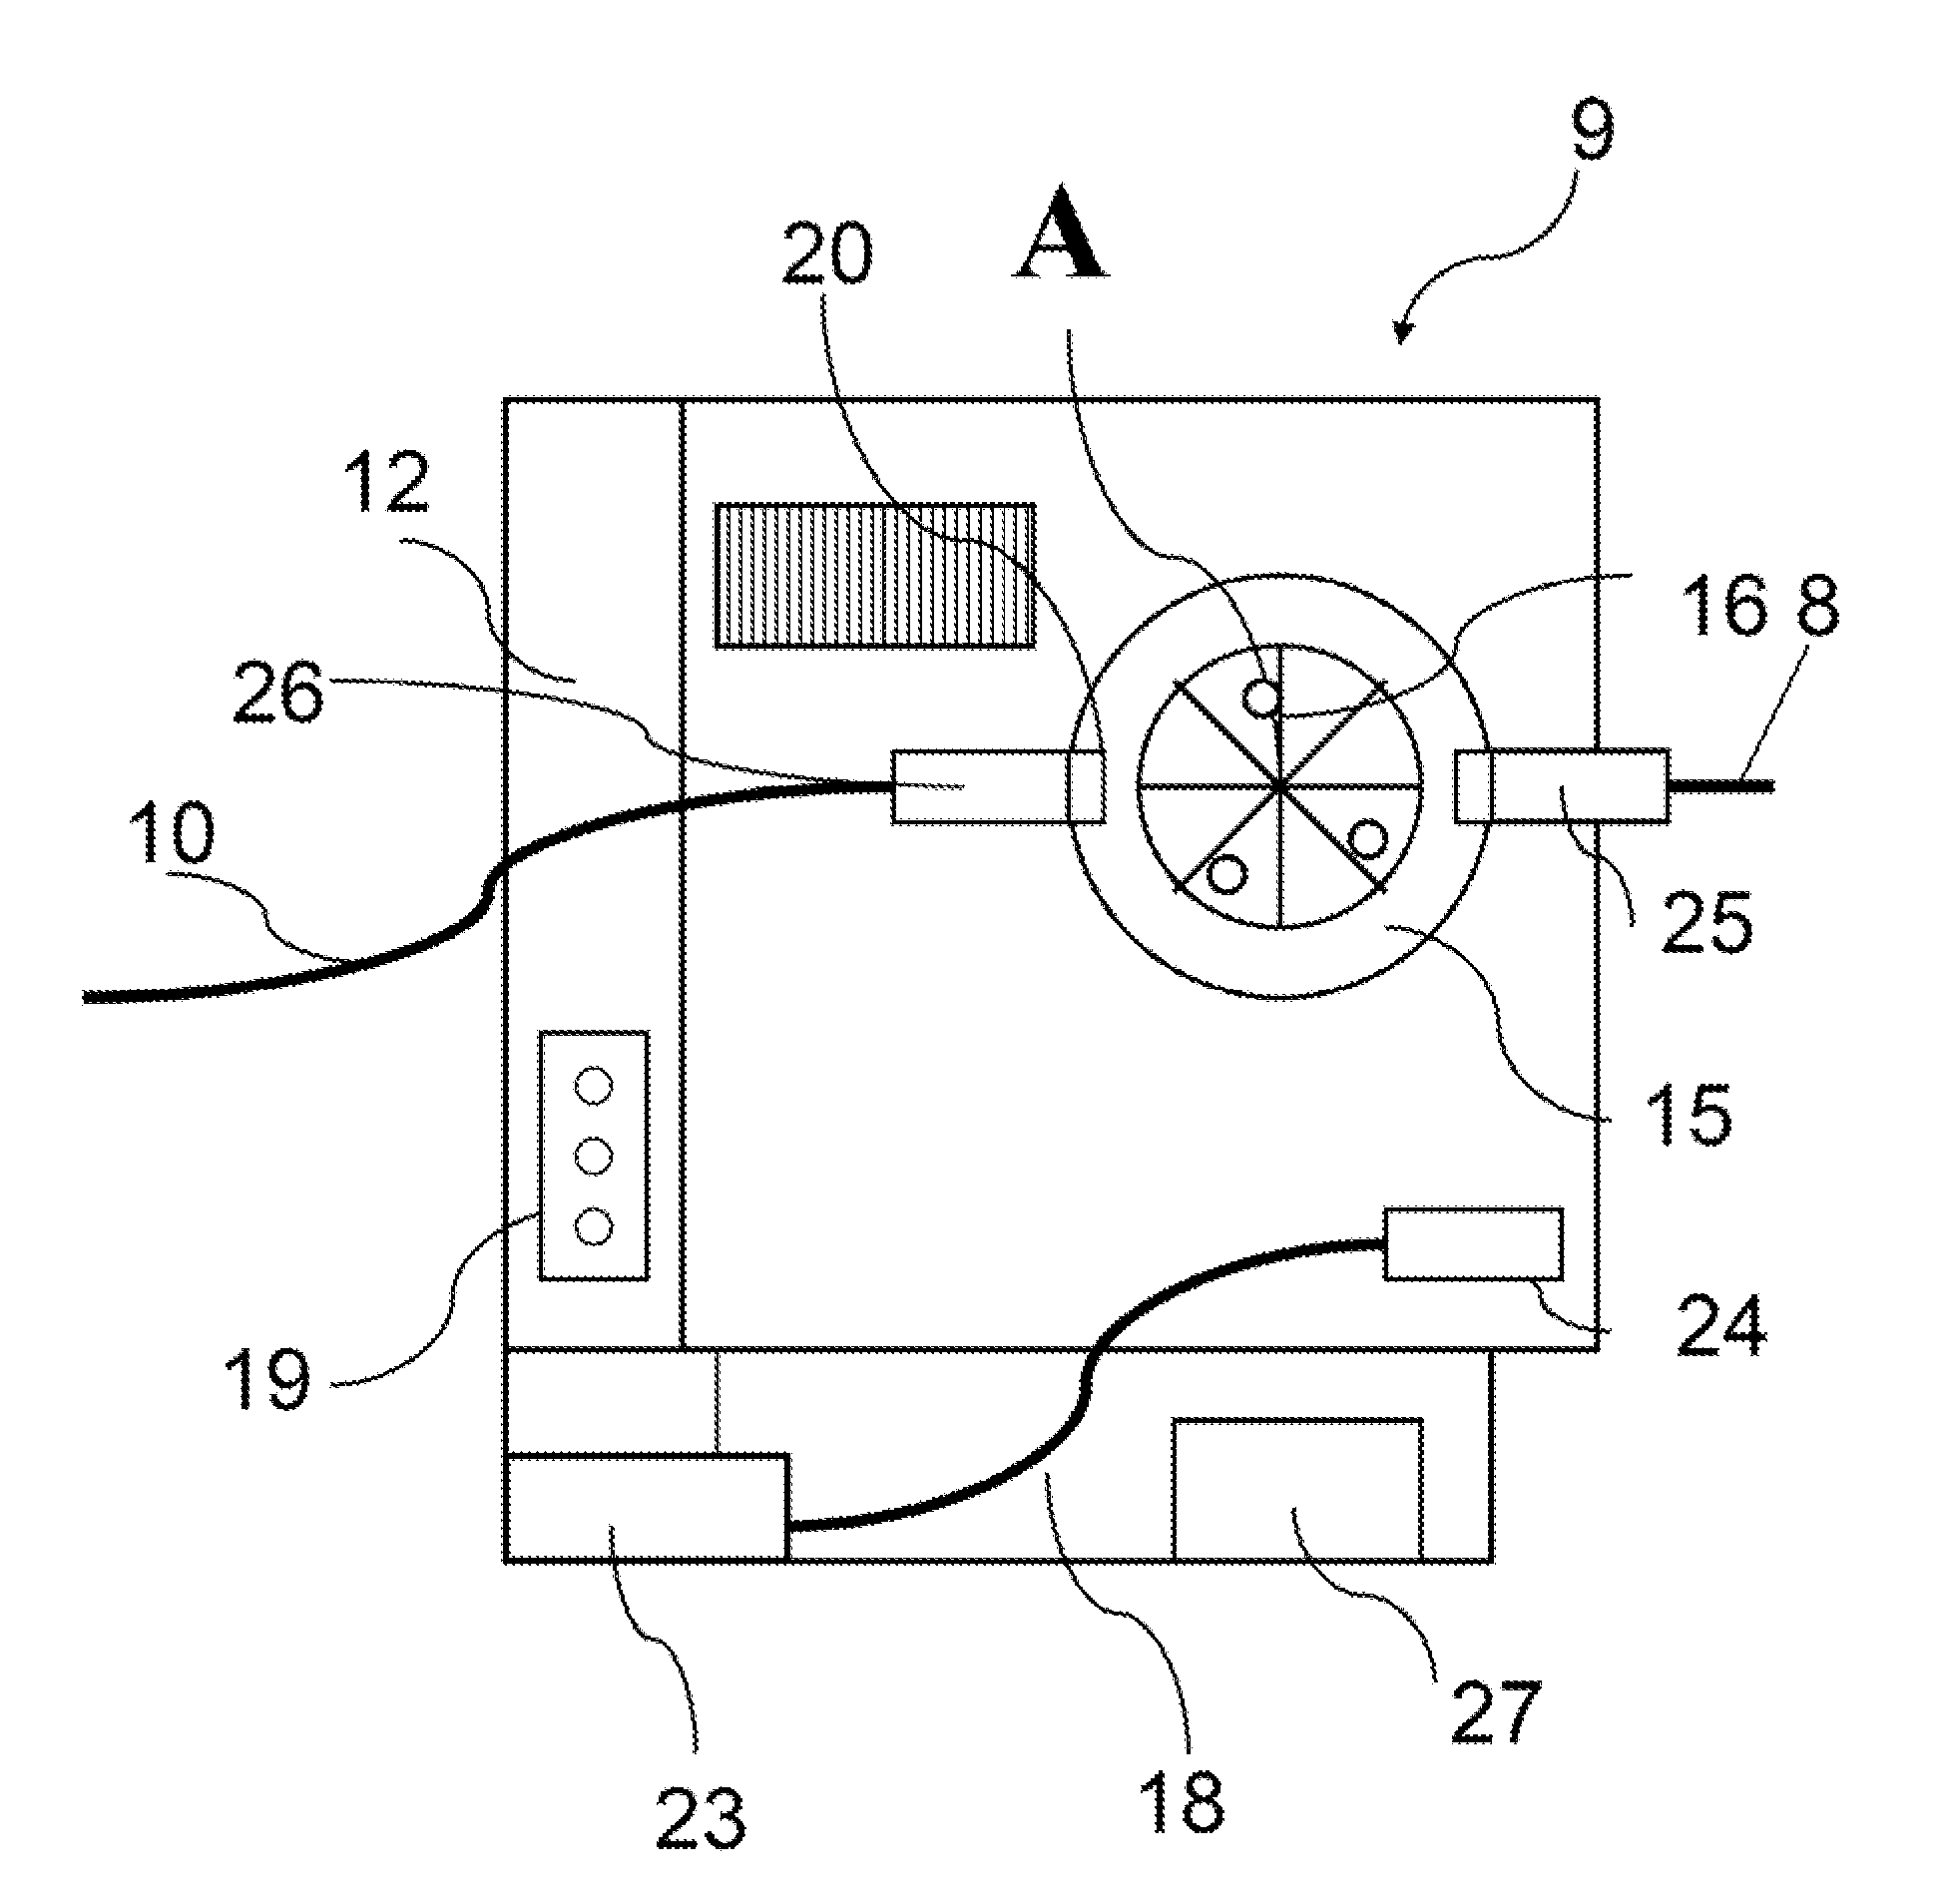 Ultrasound scanner with gel dispenser device attached to or integrated with at least one probe and use